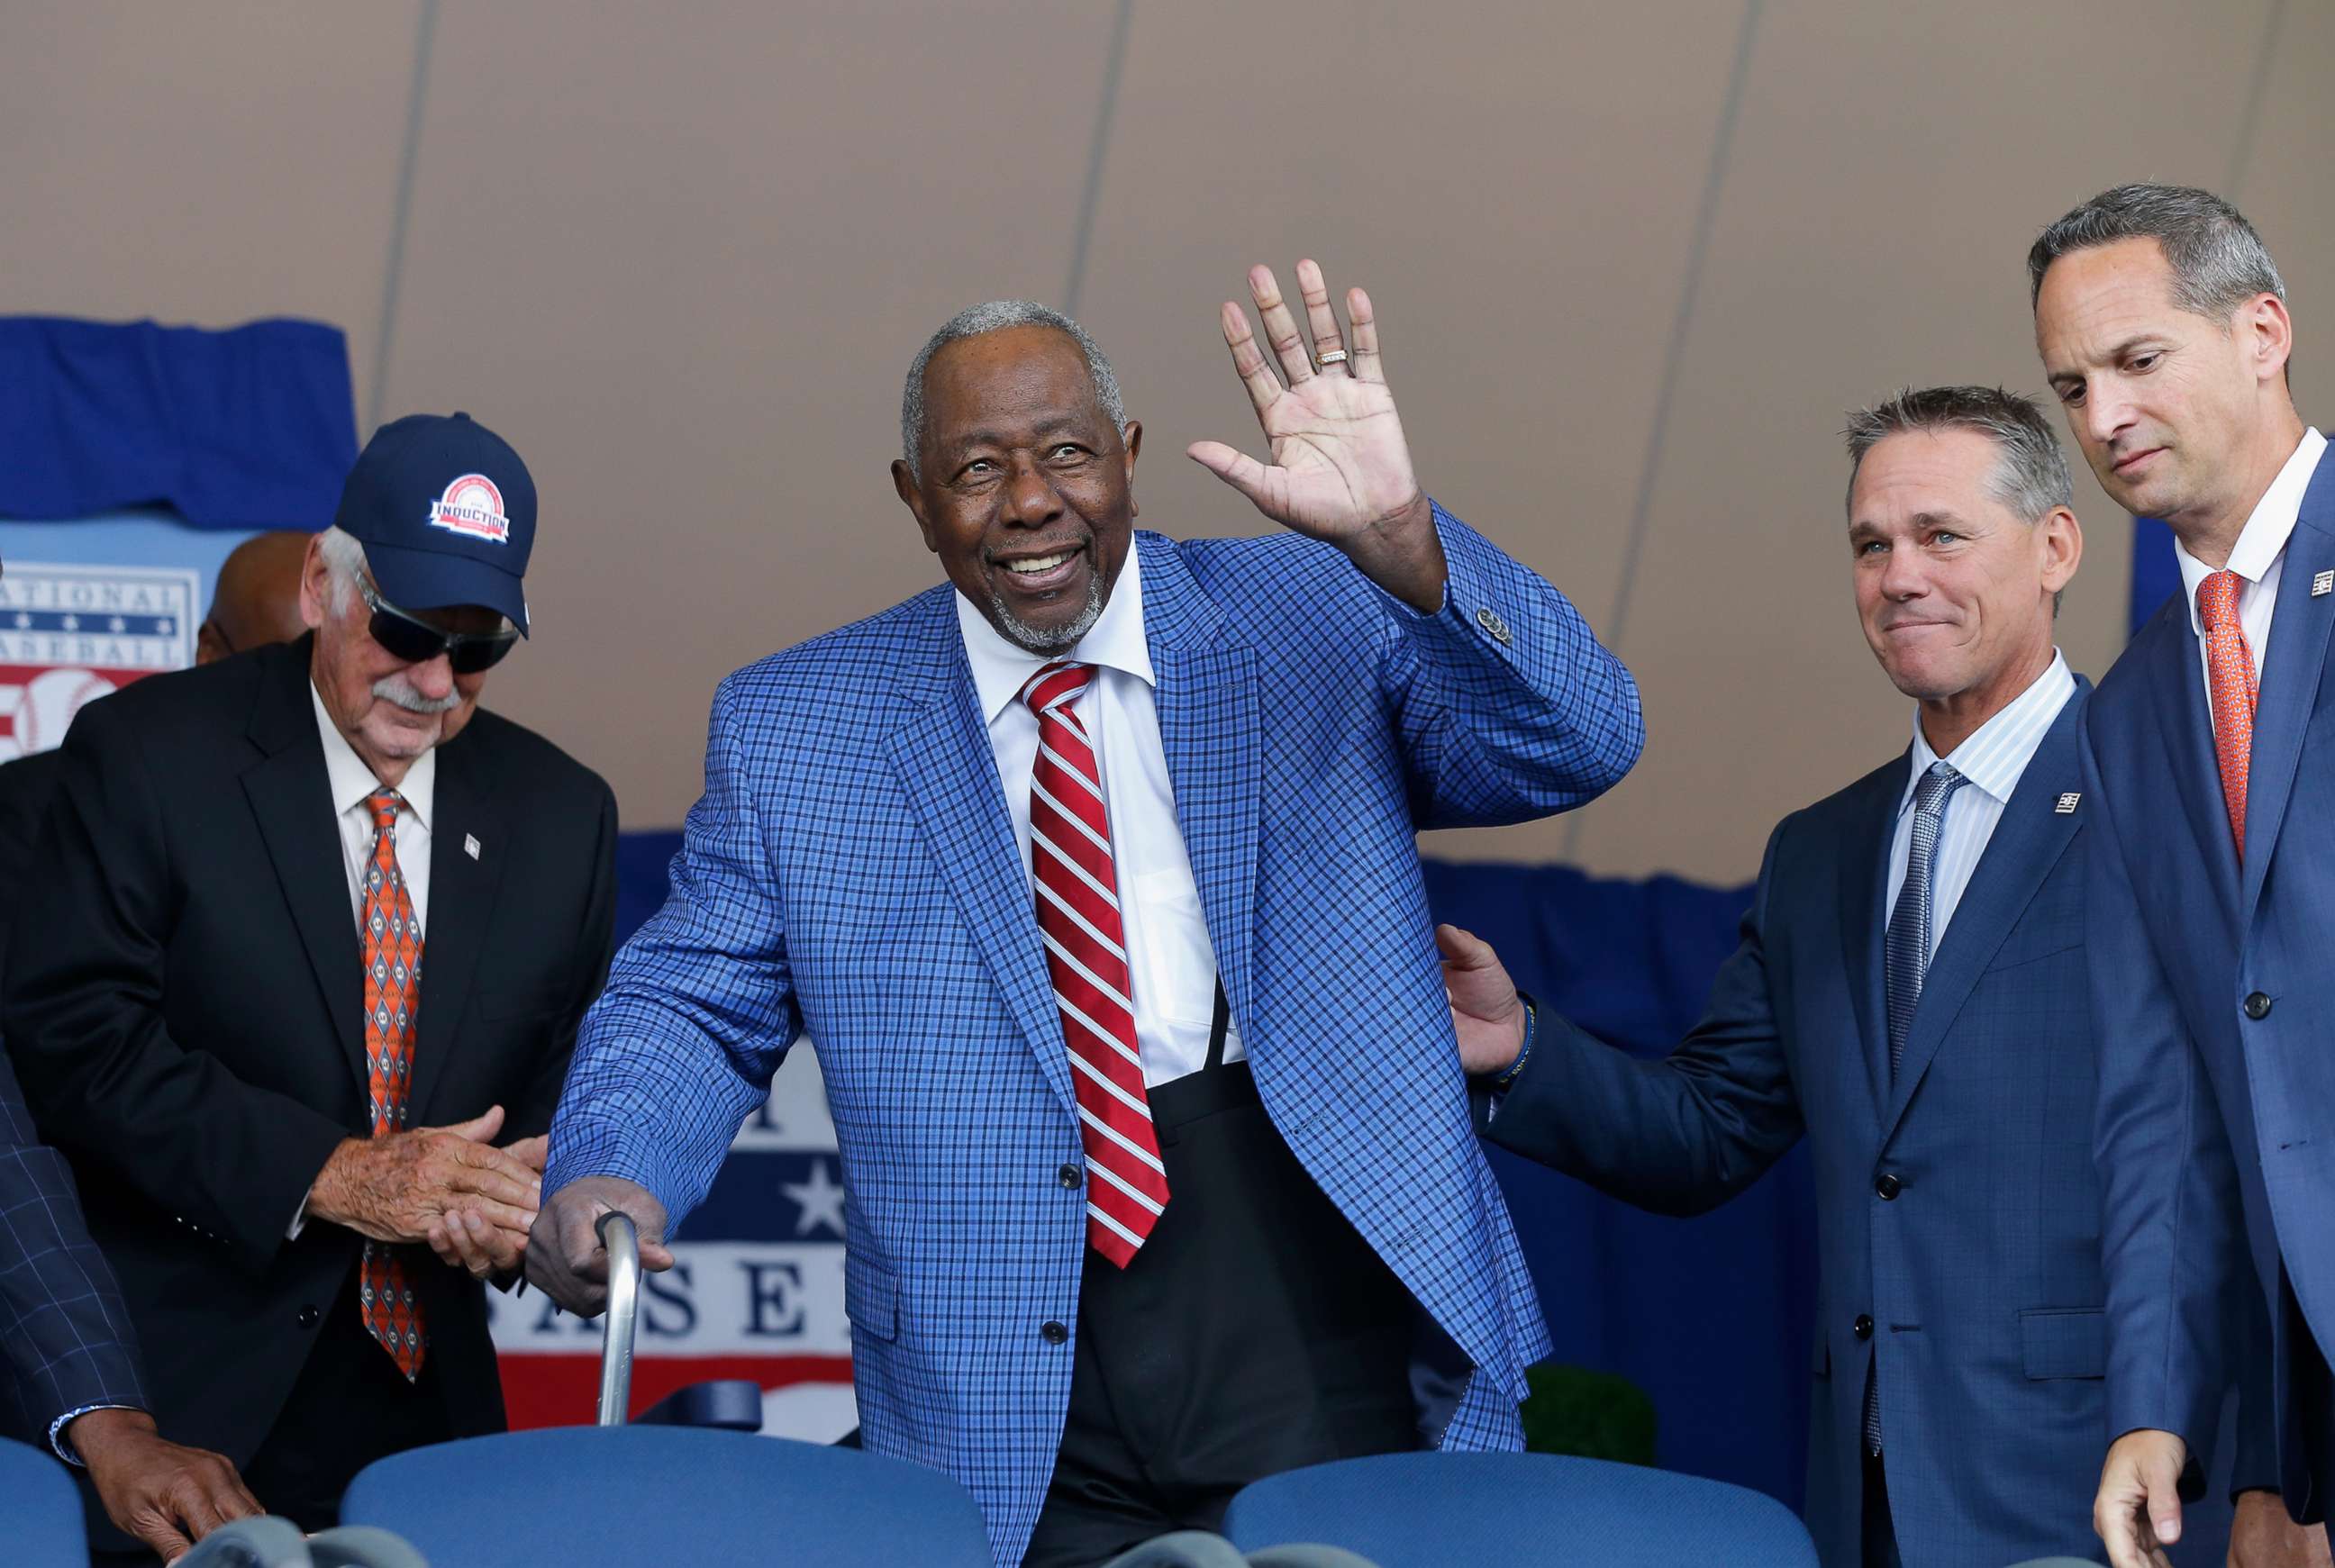 Hank Aaron, Hall of Famer and an icon in Milwaukee and Atlanta